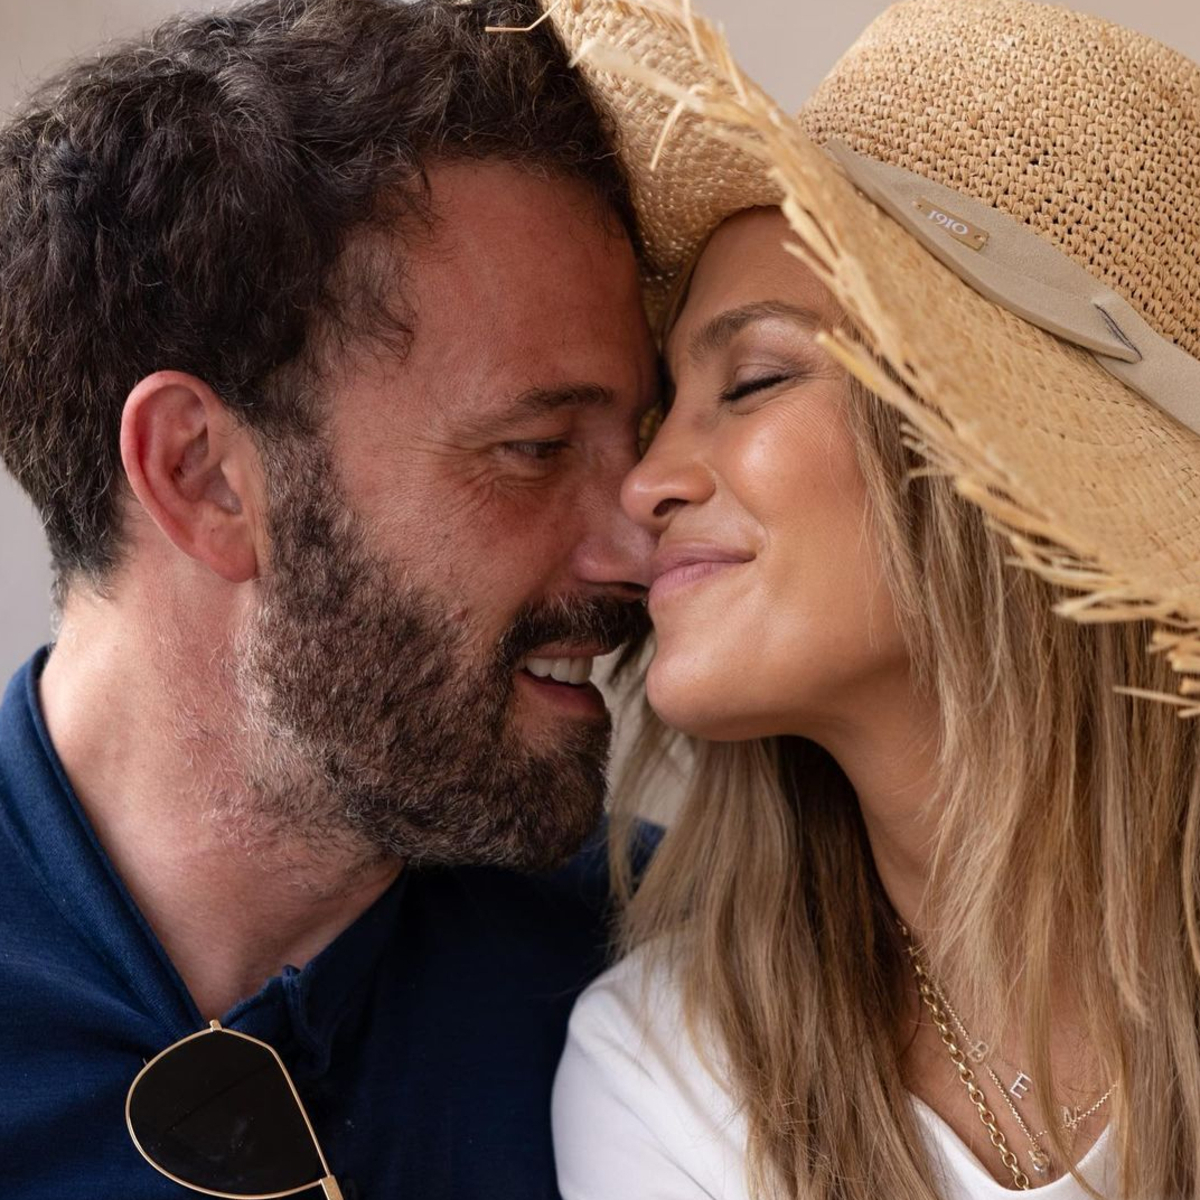 Jennifer Lopez Declares “Commitment Is Sexy” After Getting Tattoos With Ben Affleck – E! Online